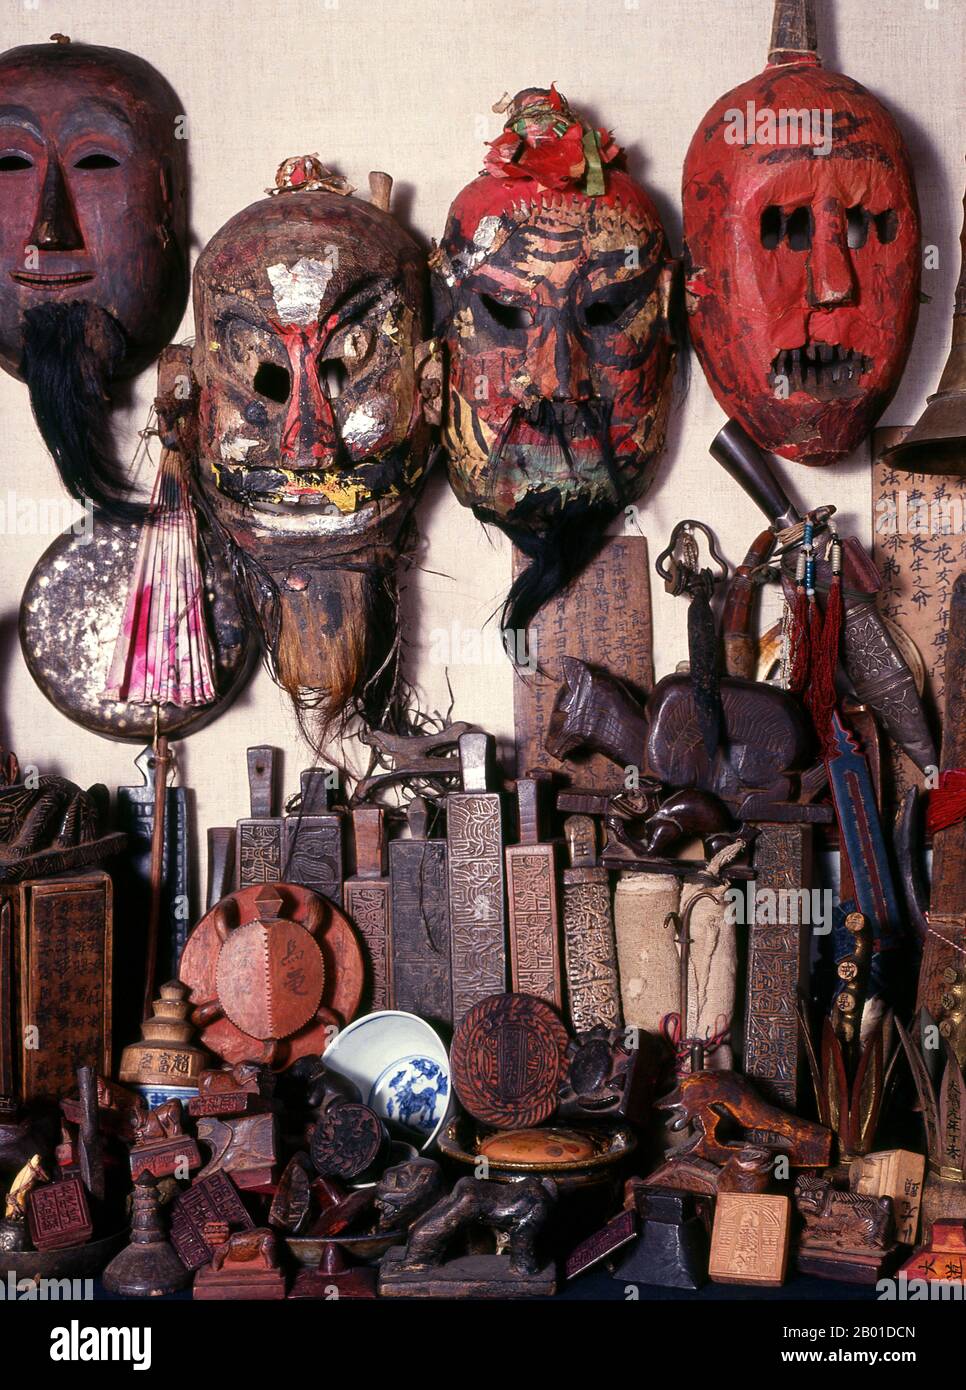 Thailand/China: Yao shaman's masks and other shaman paraphernalia from northern Thailand.  The Yao nationality (its great majority branch is also known as Mien; Pinyin: Yáo zú; Vietnamese: người Dao) is a government classification for various minorities in China. They form one of the 55 ethnic minority groups officially recognised by the People's Republic of China, where they reside in the mountainous terrain of the southwest and south.  They also form one of the 54 ethnic groups officially recognised by Vietnam. Stock Photo